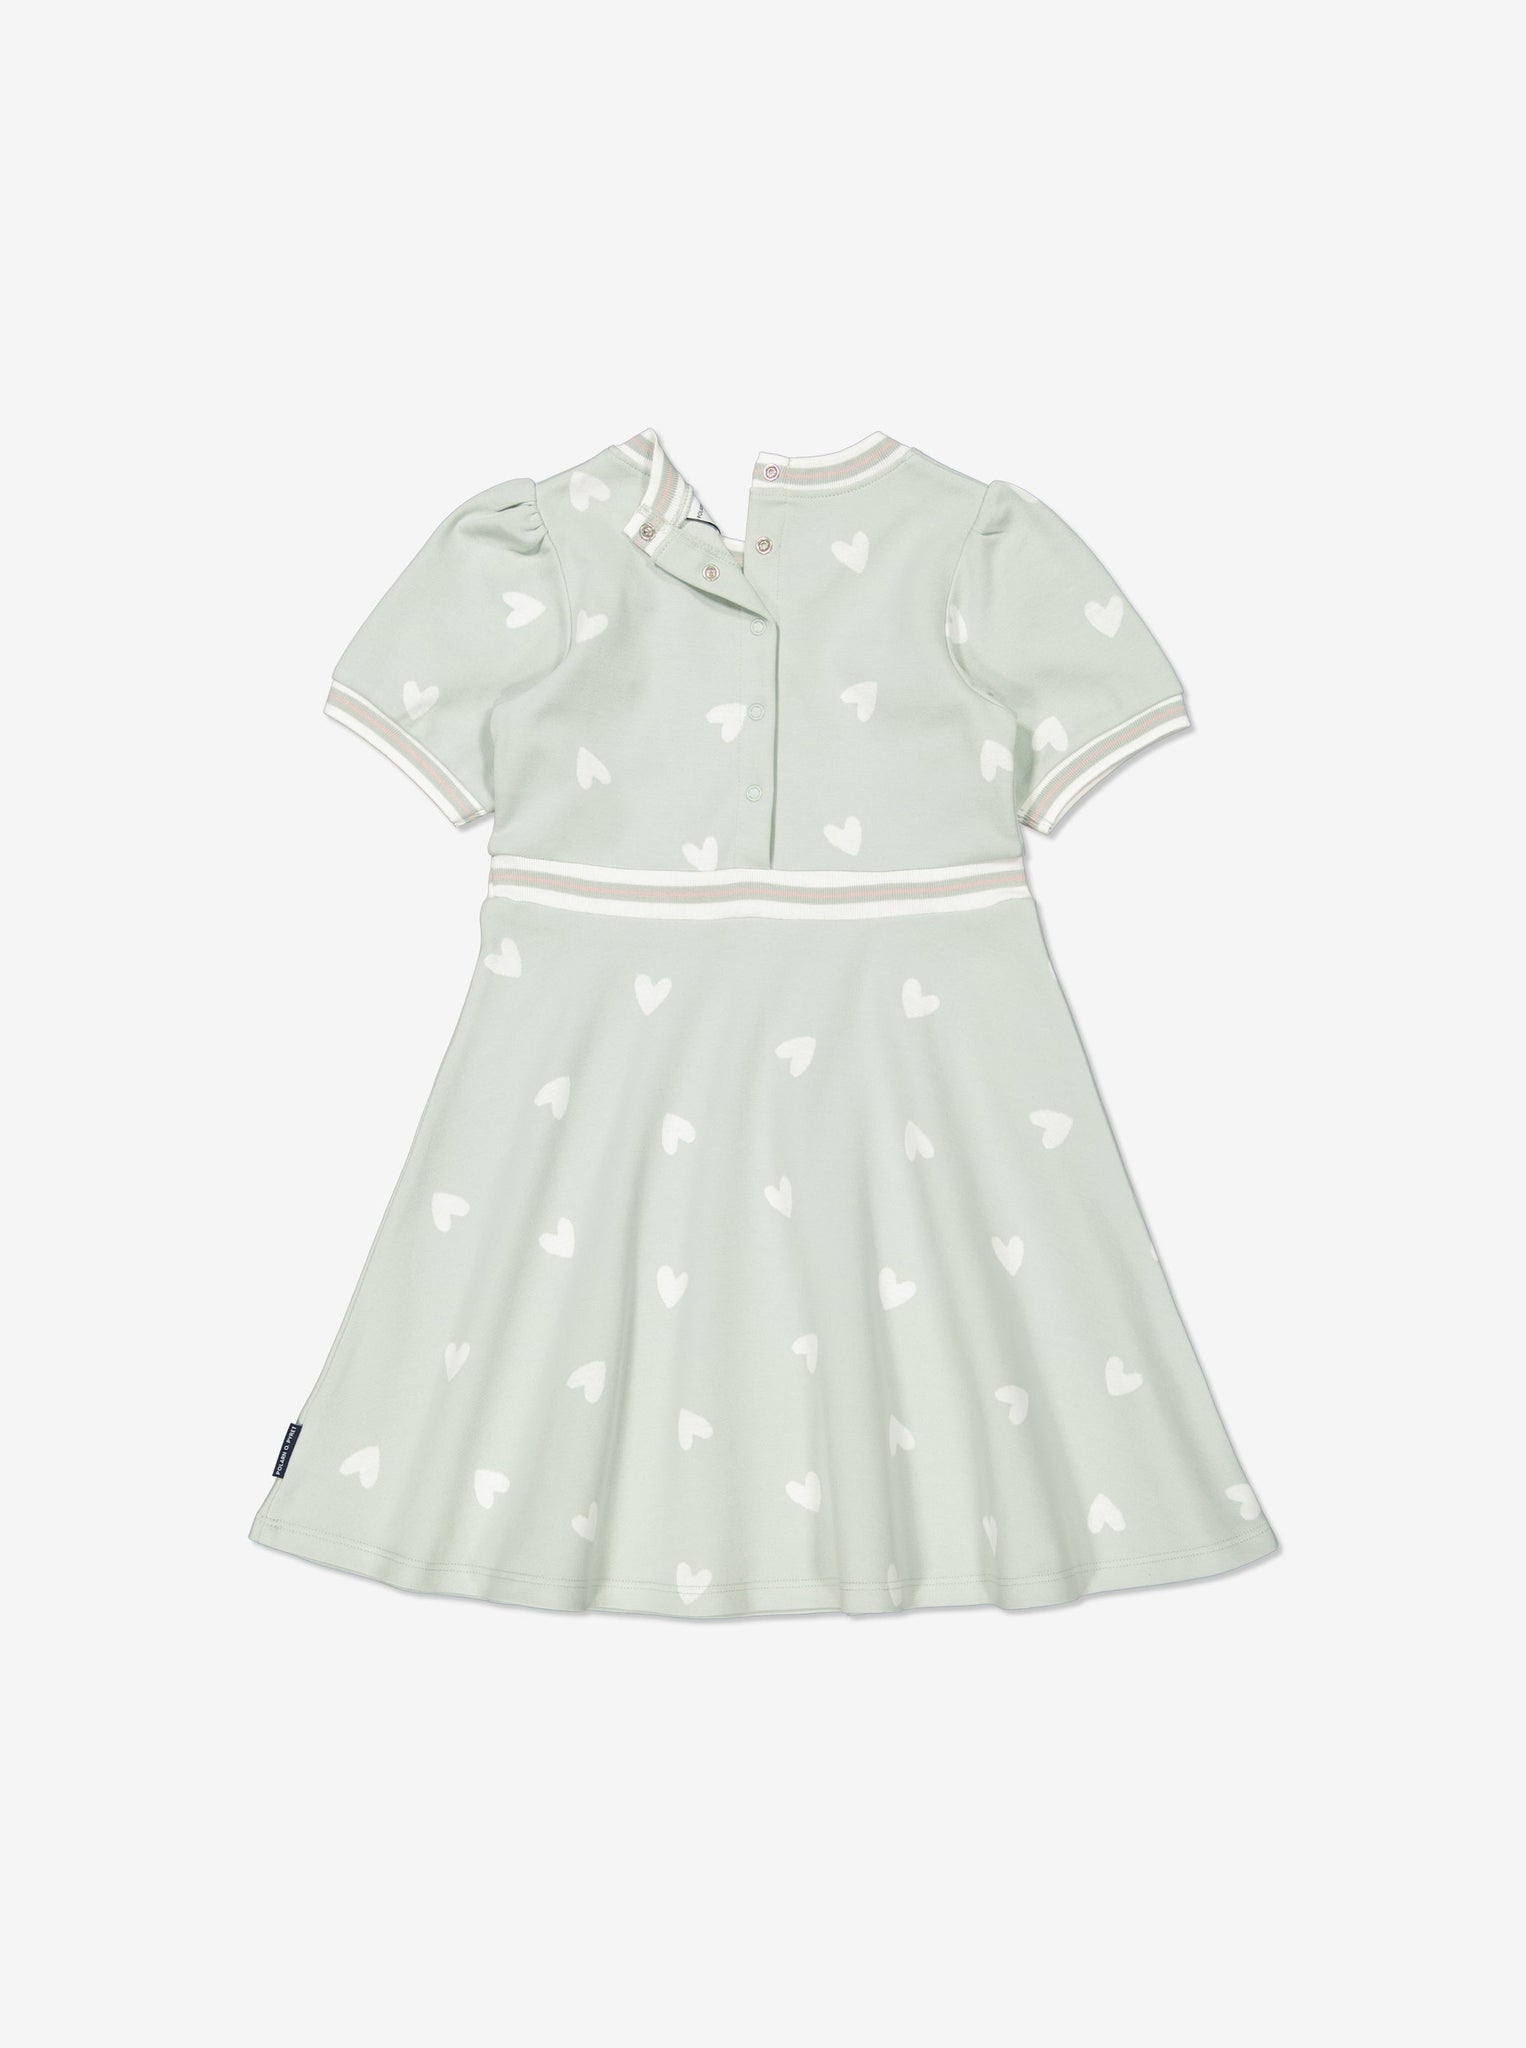  Organic Cotton Heart Print Dress from Polarn O. Pyret Kidswear. Made using sustainable materials.